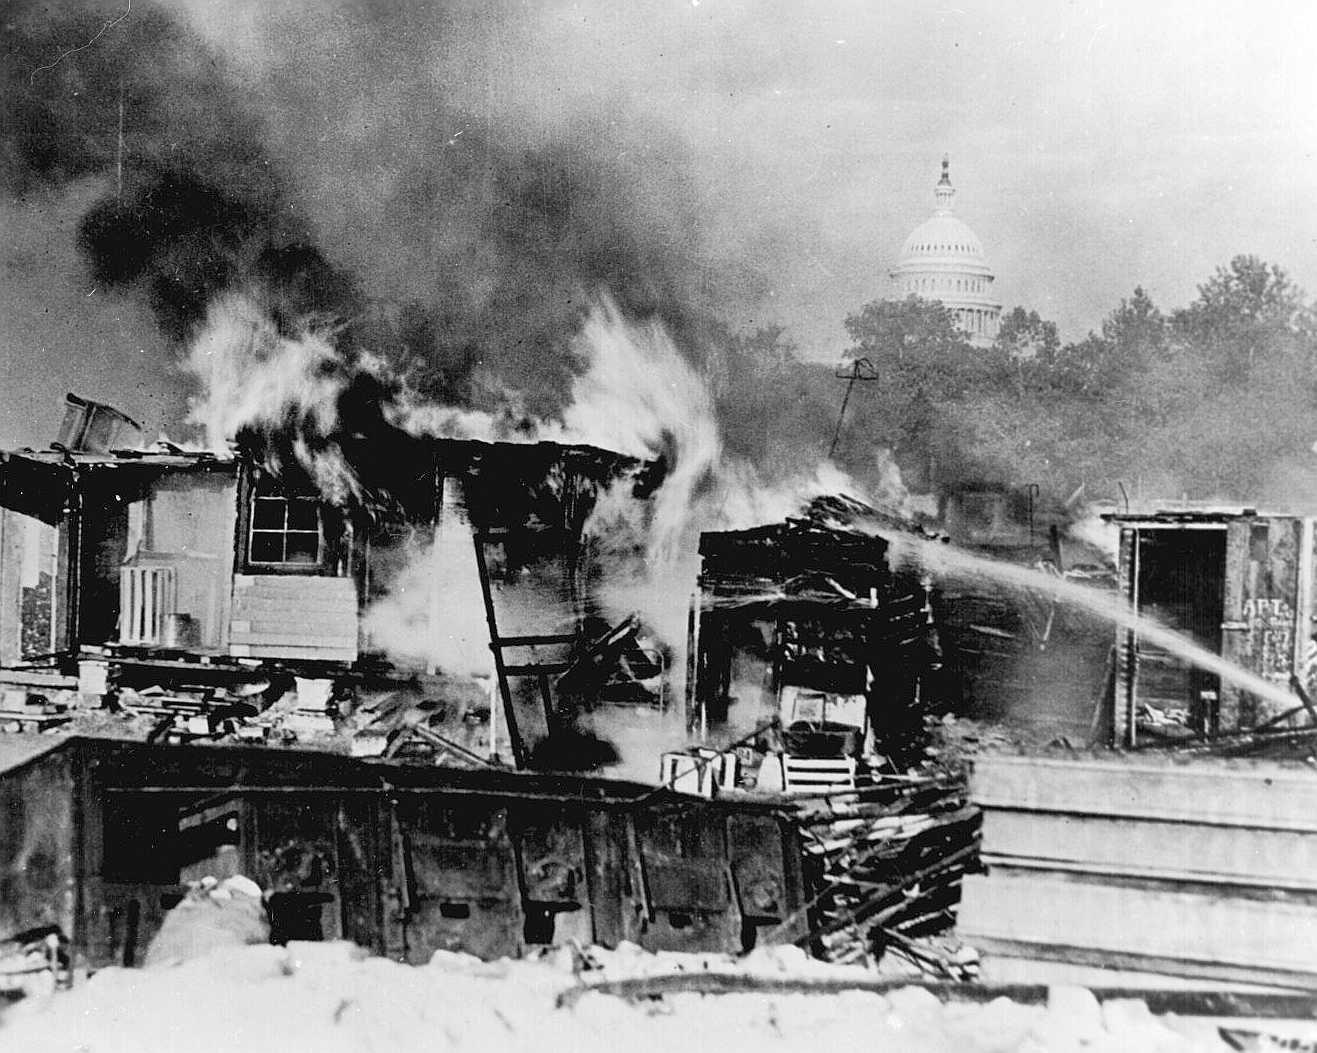 Shacks that members of the Bonus Army erected on the Anacostia Flats burning after the confrontation with the military. Photo: Signal Corps/National Artchives